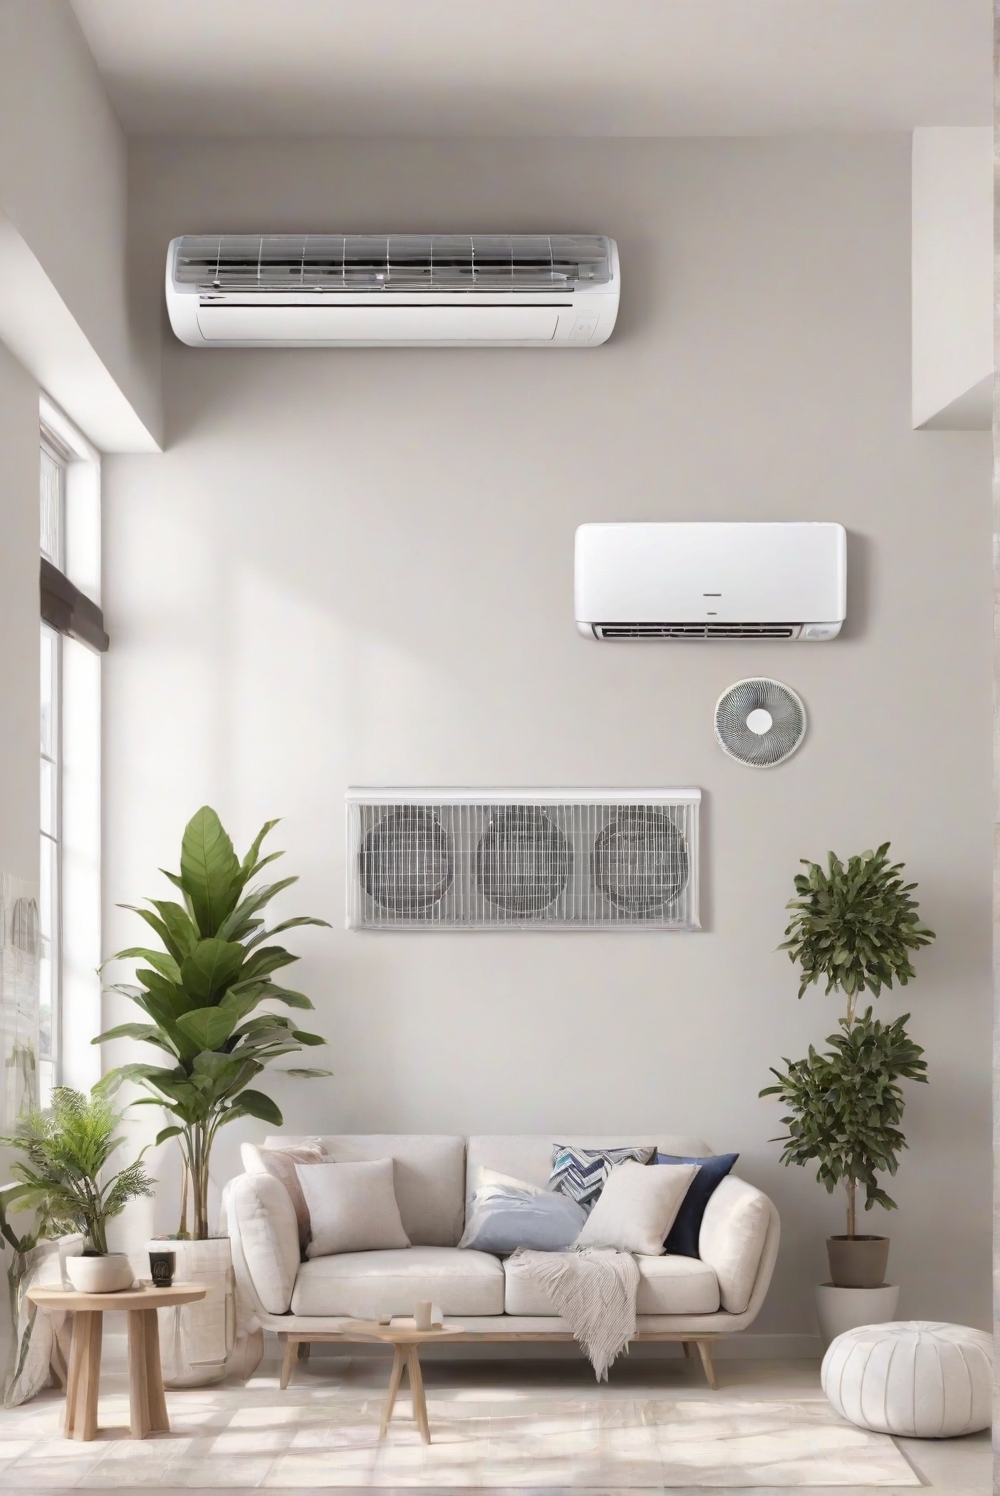 cooling system, HVAC installation, air purification, smart thermostats, energy-efficient cooling, climate control, refrigerant management decorating, interior design, space planning, bedroom design, kitchen designs, living room interior, wall paint